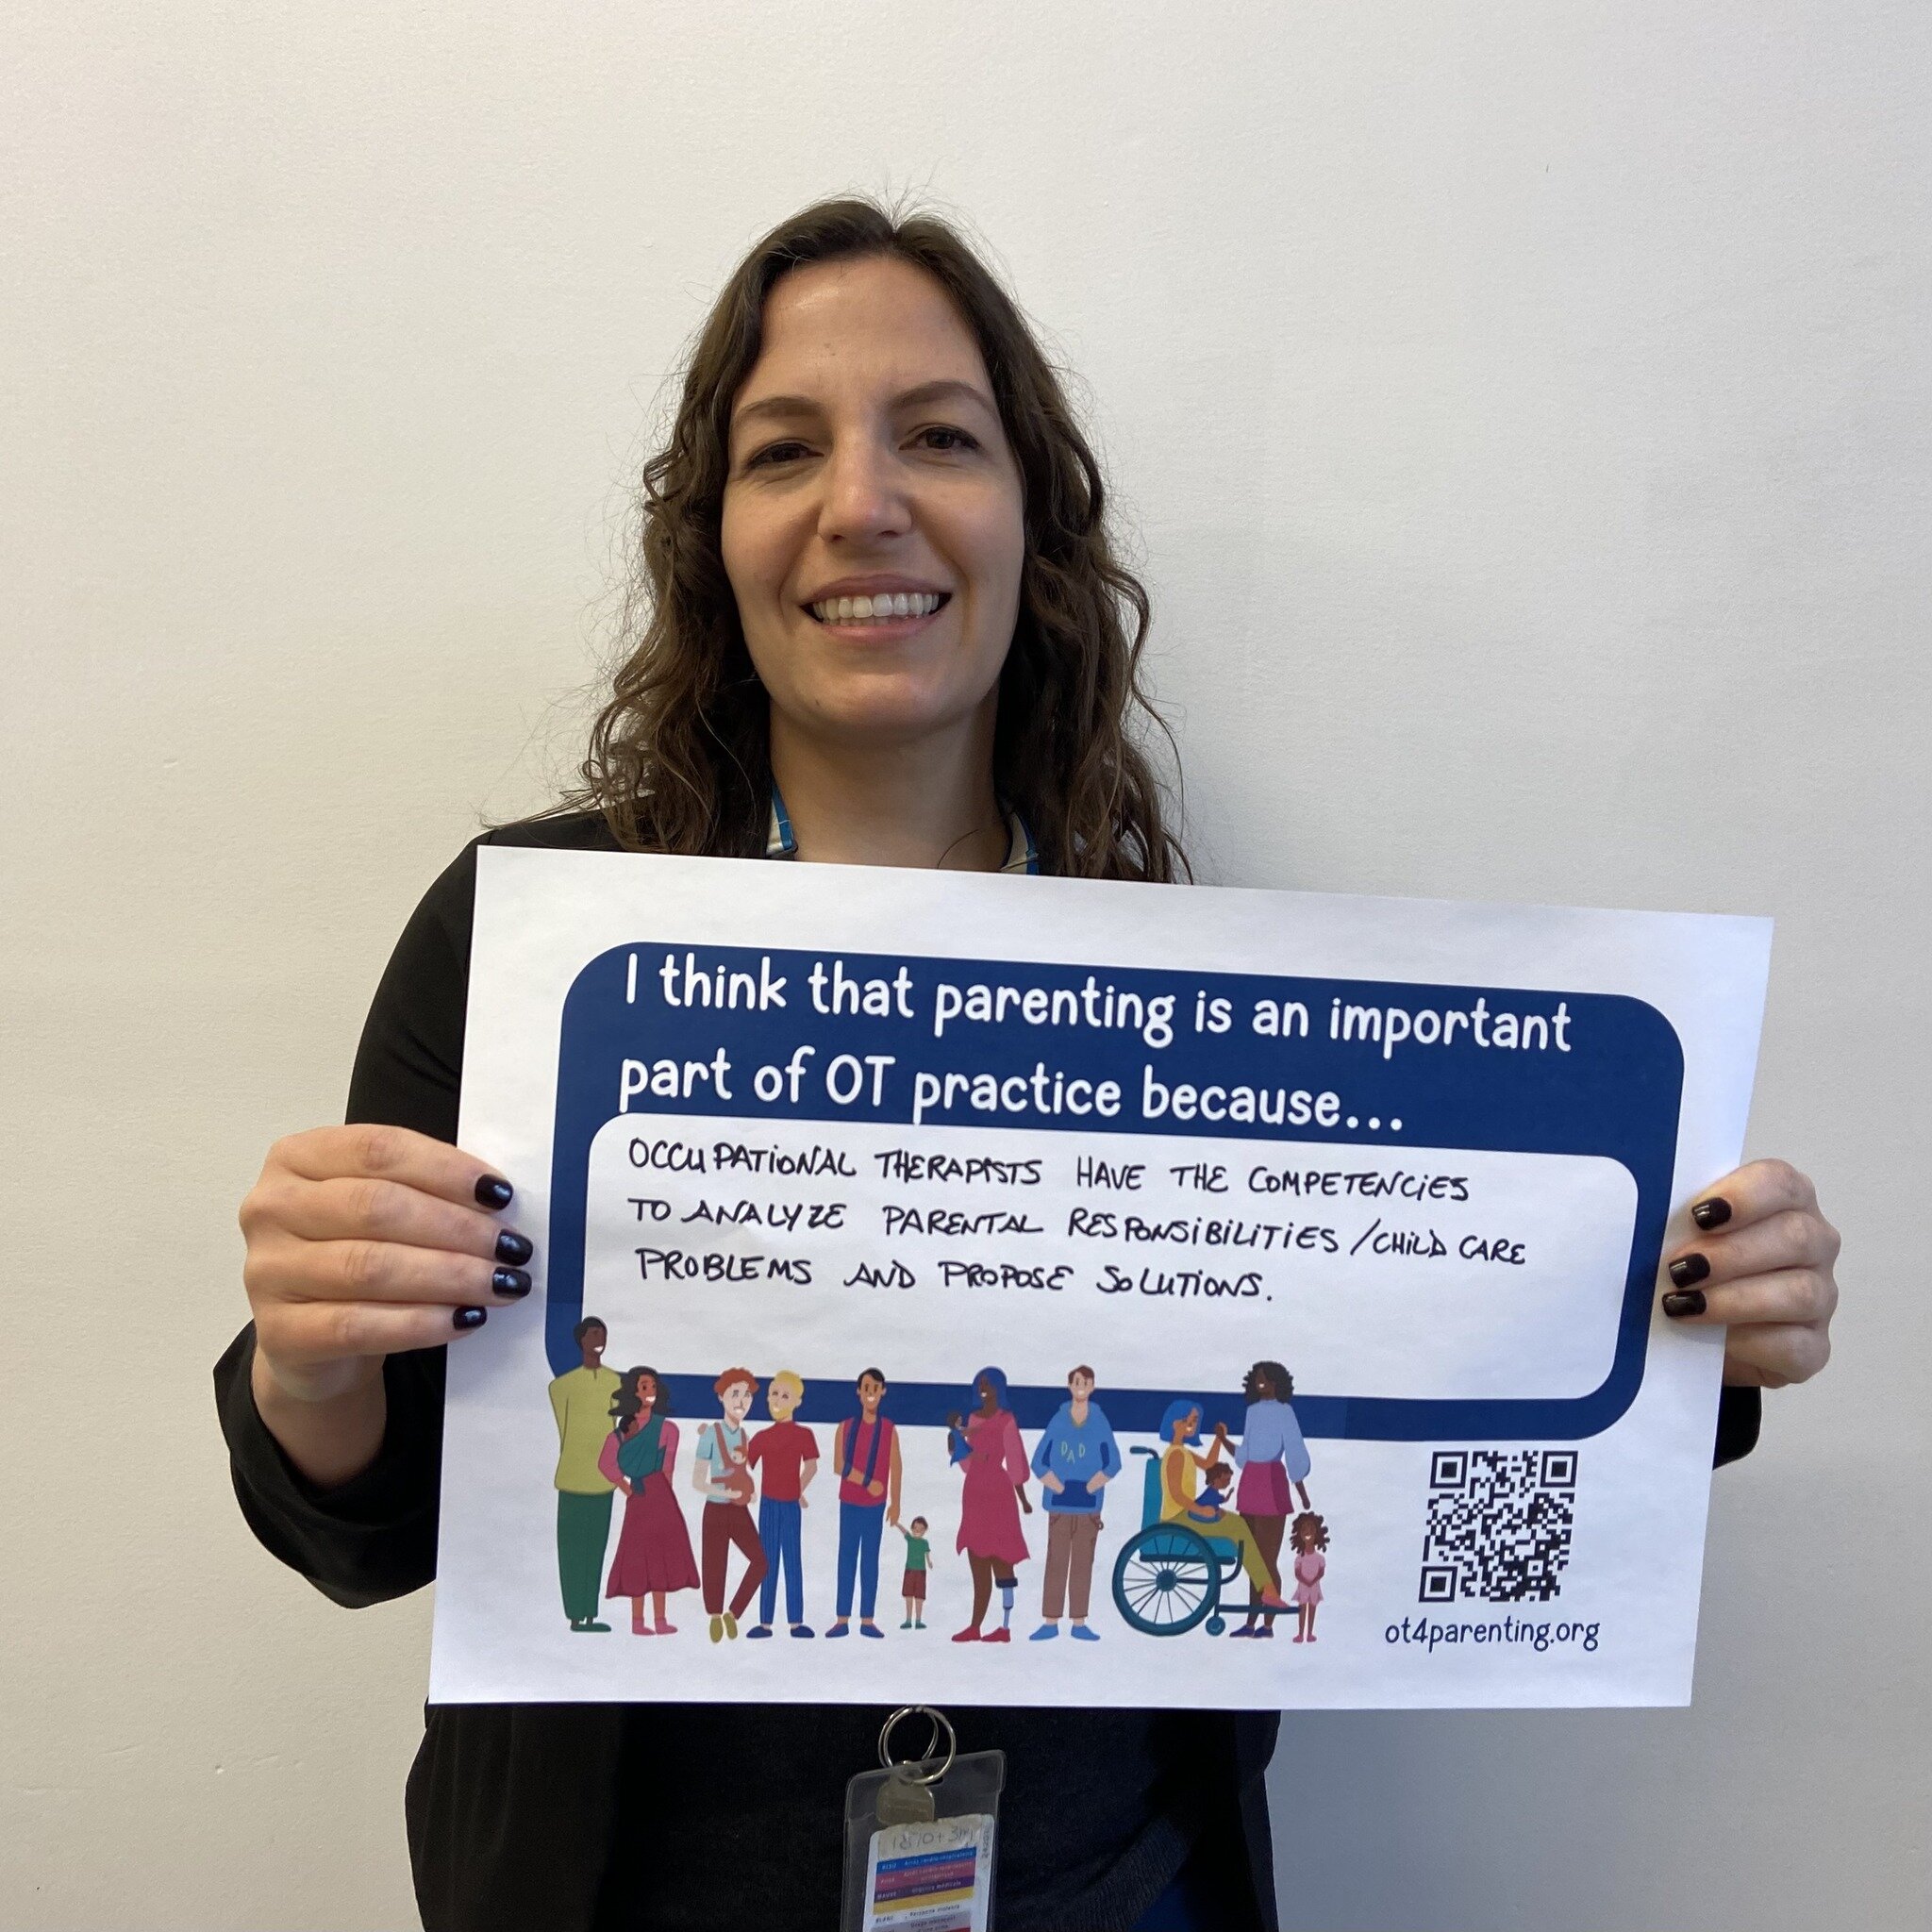 &Eacute;milie is an OT and clinical coordinator at the Driving Assessment Clinic of the Centre de r&eacute;adaptation en d&eacute;ficience physique Lucie-Bruneau and she thinks that parenting is an important part of OT practice because... &quot;occup